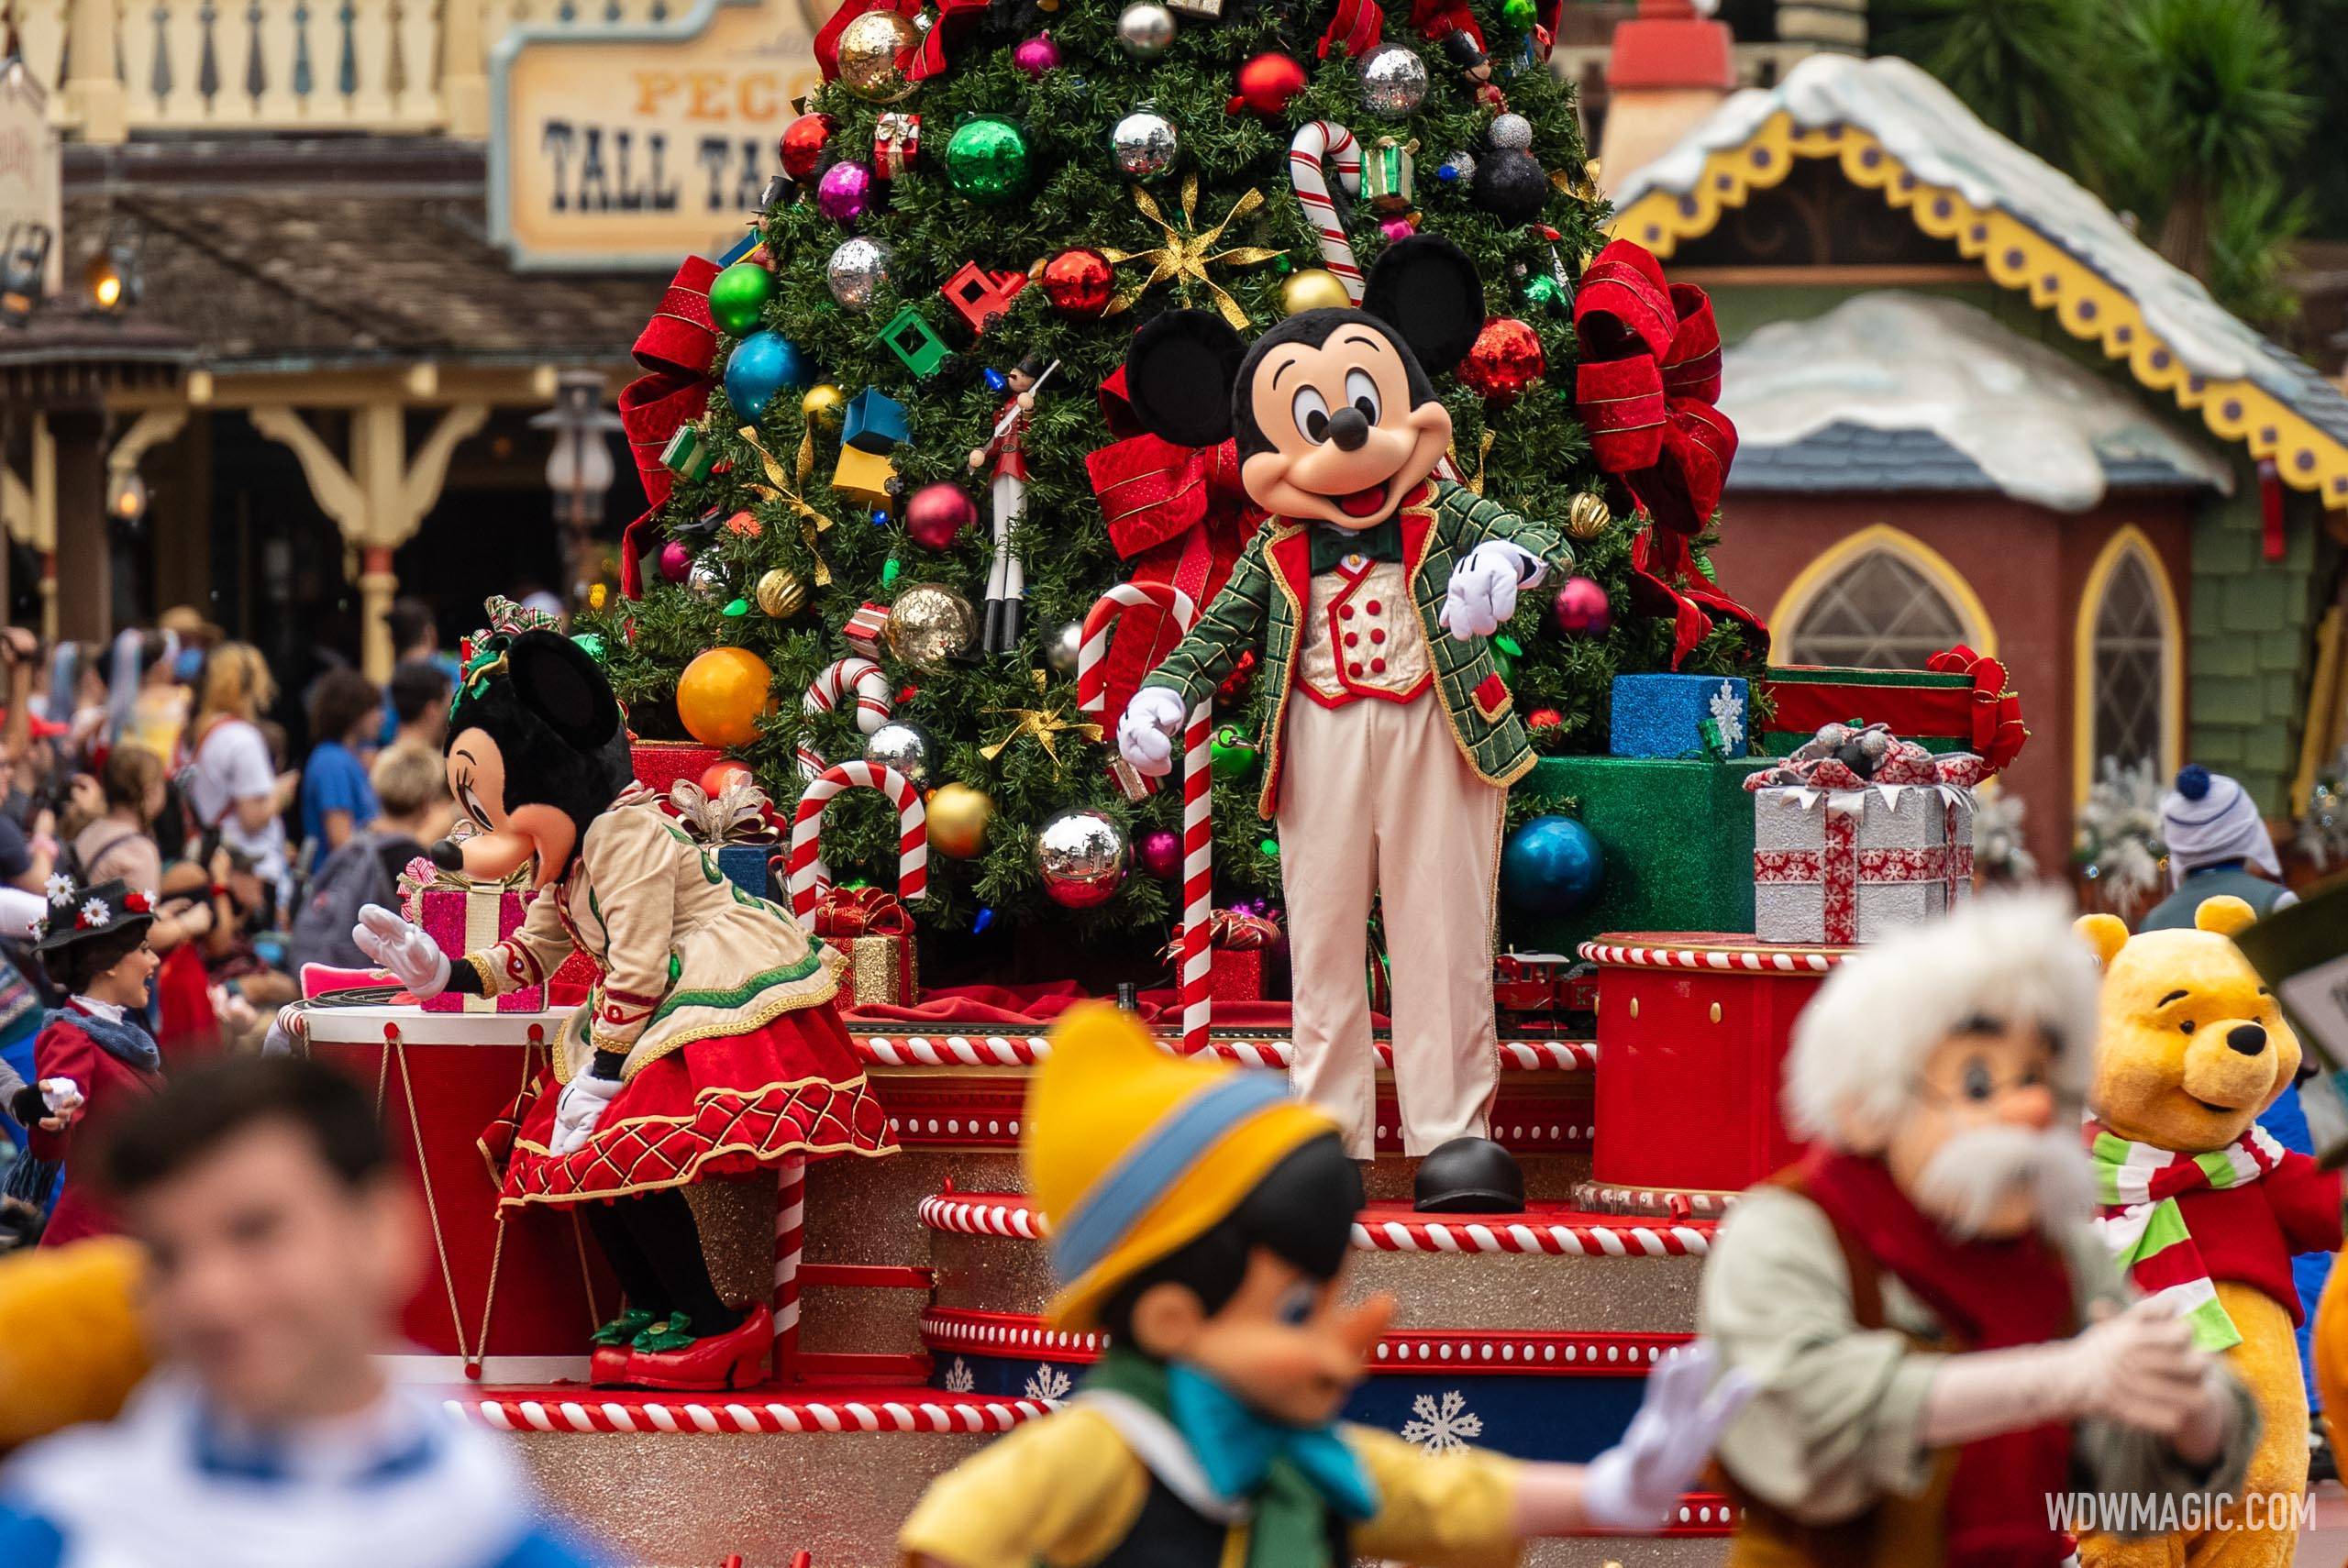 Magic Kingdom will now be open until midnight through the Christmas peak week